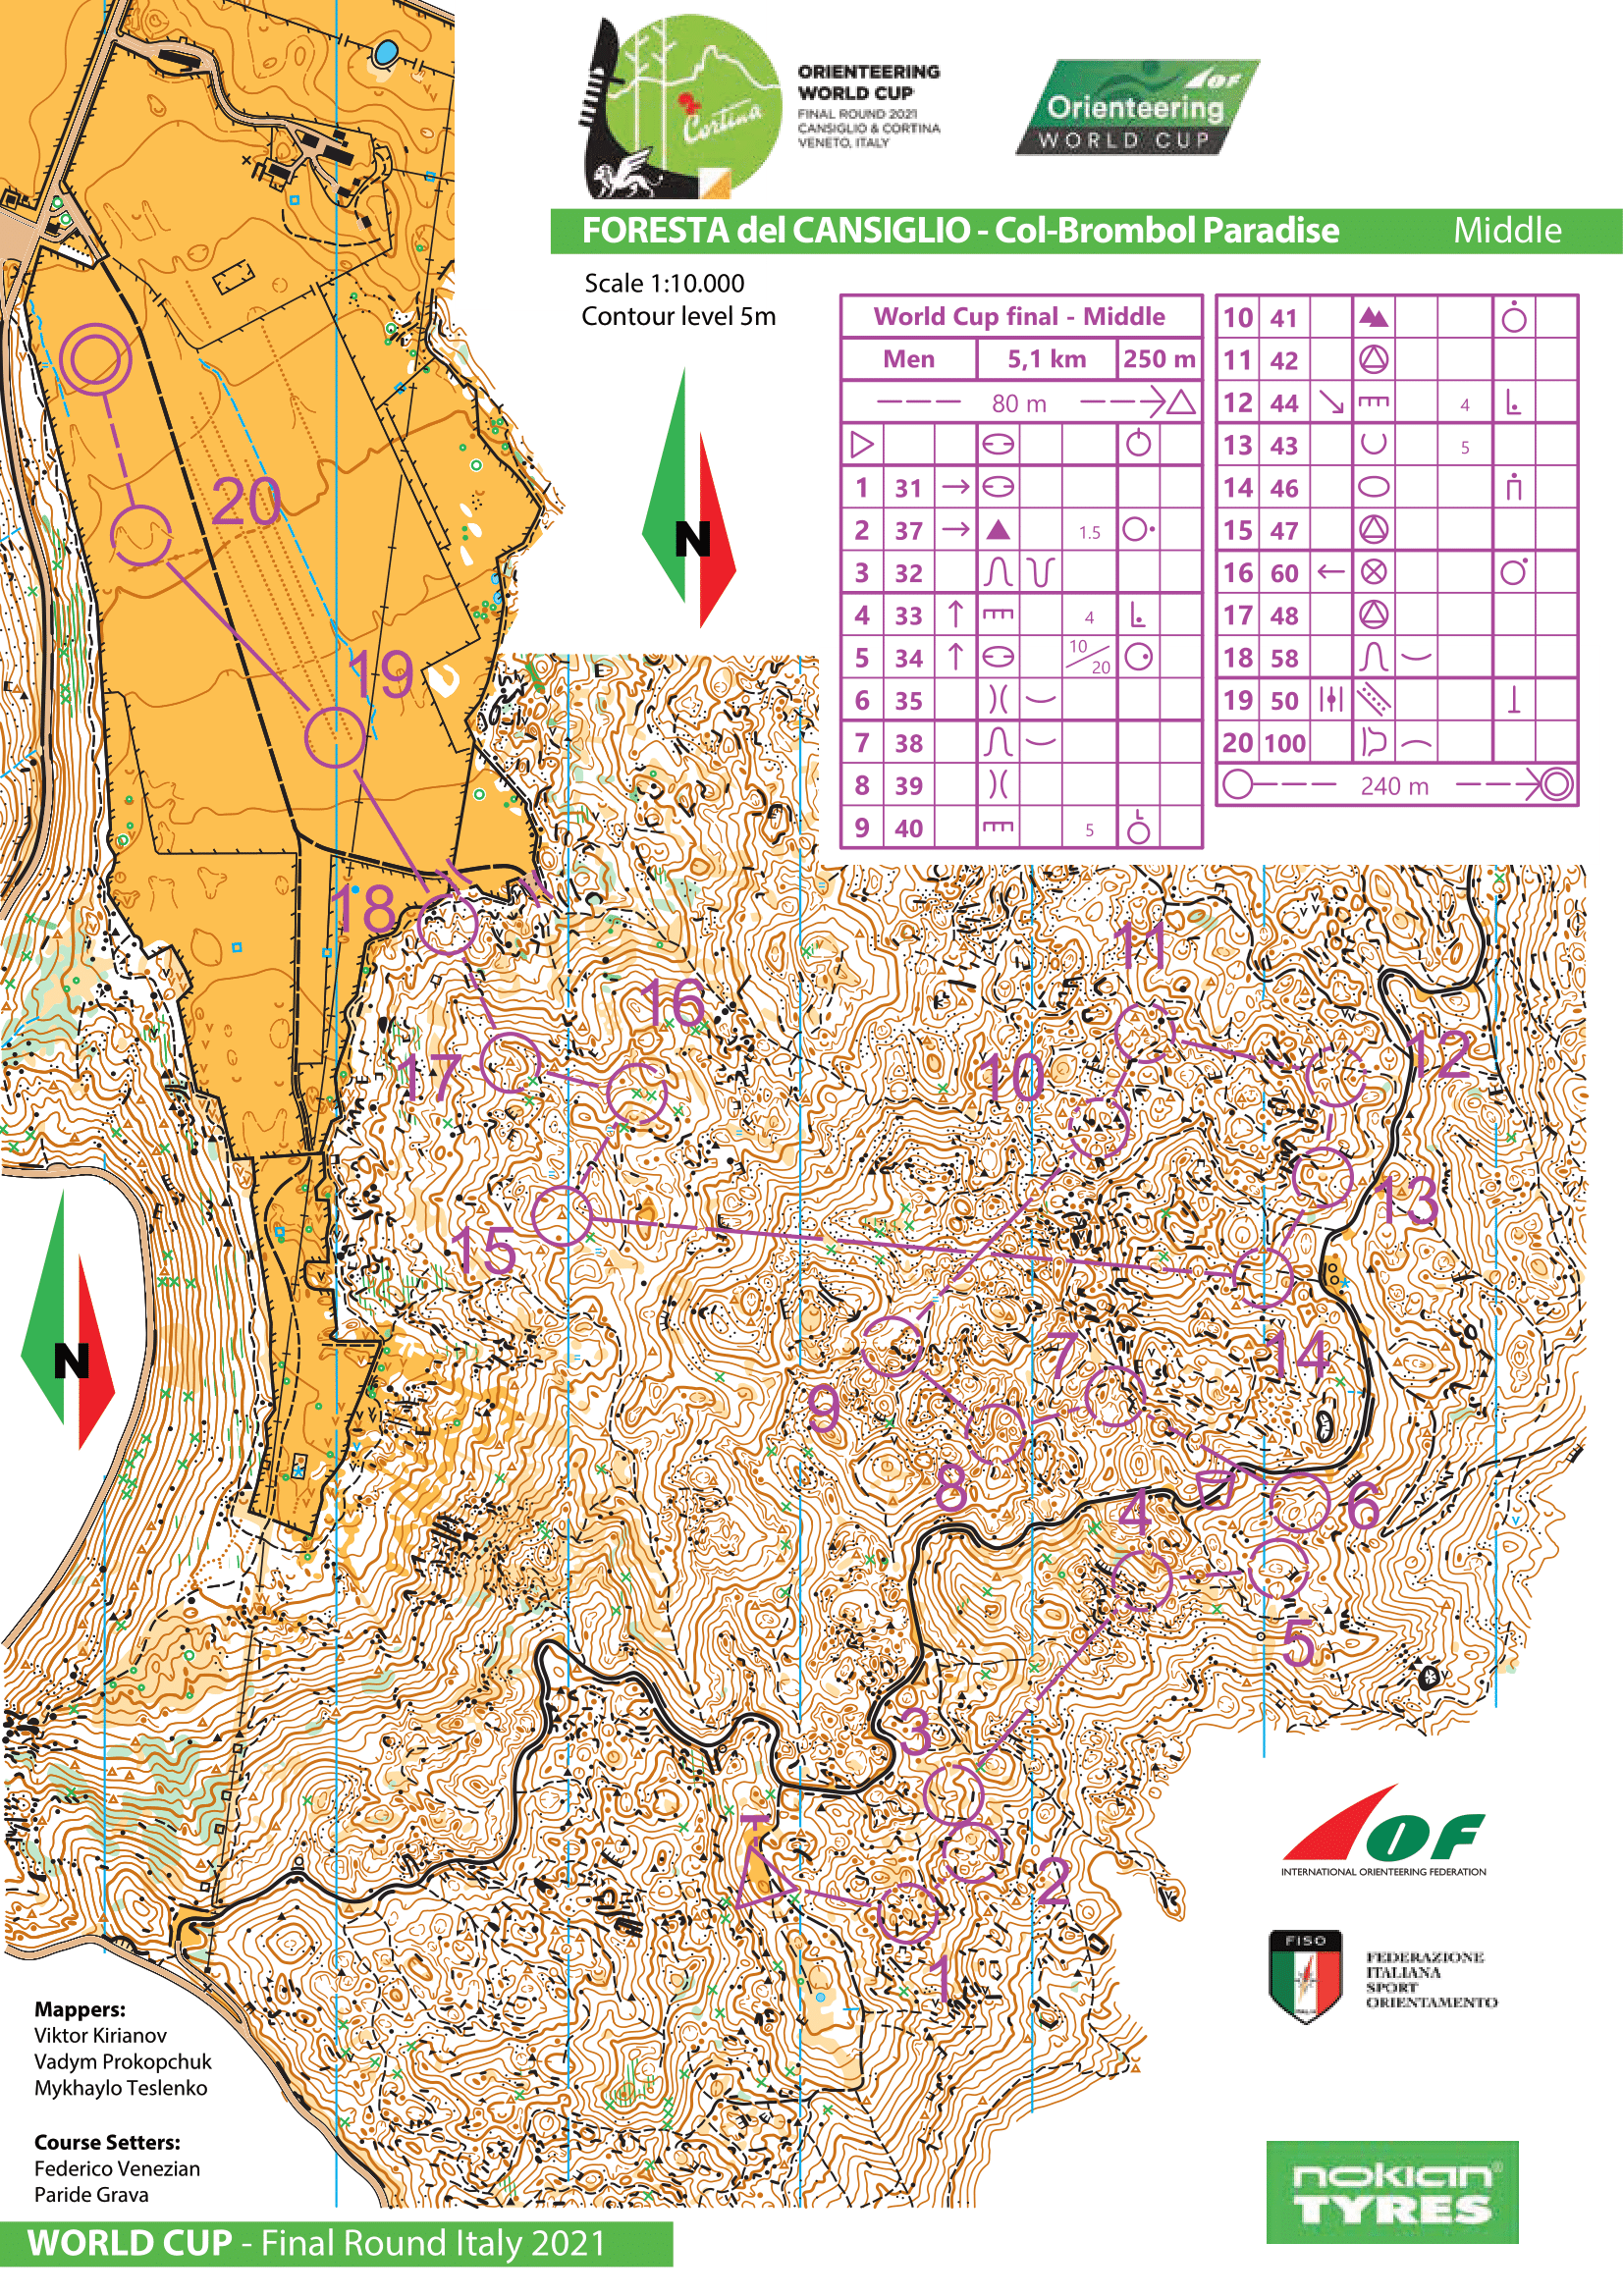 WC 2021 Italy Middledistance (03/10/2021)